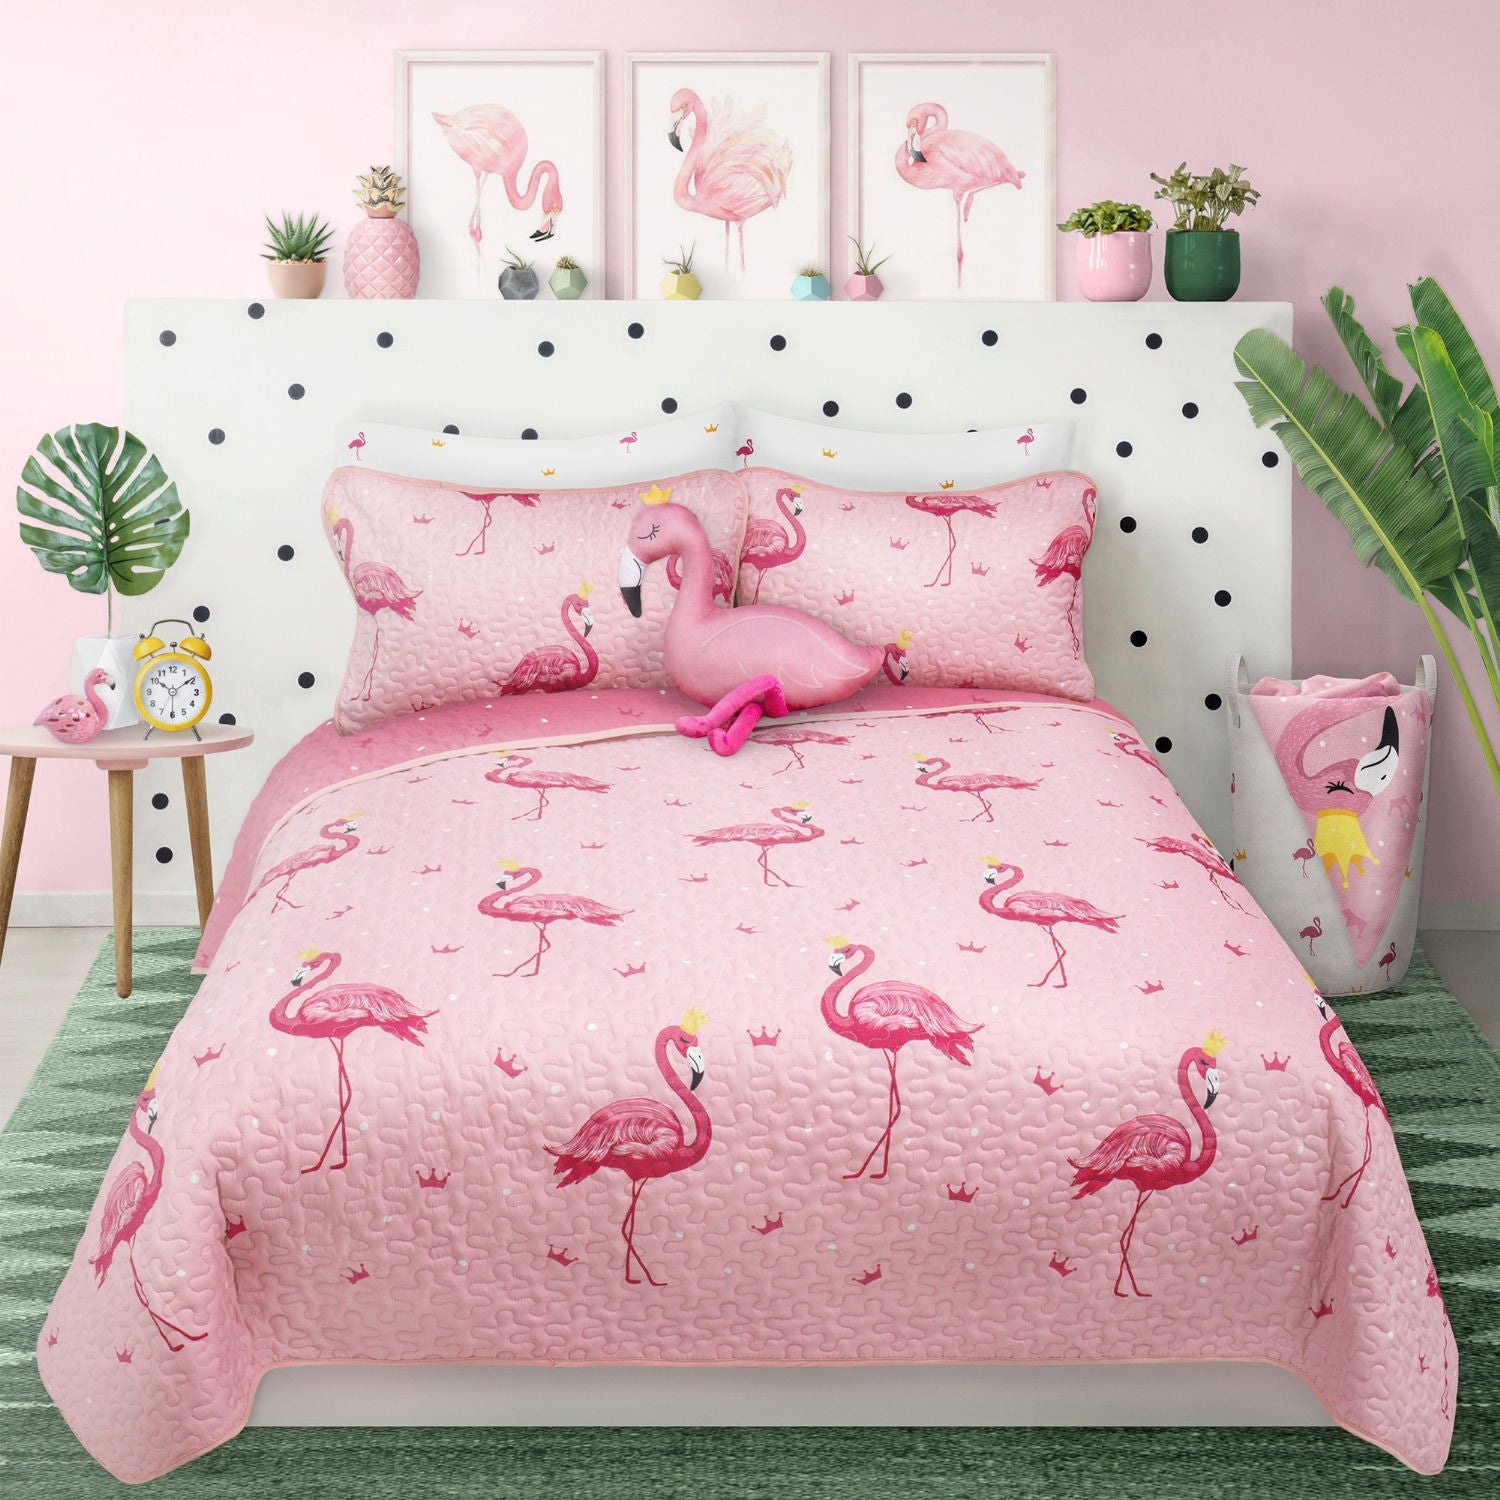 Woven Printed Quilt Bedding Set 2 Piece Twin Flamingo